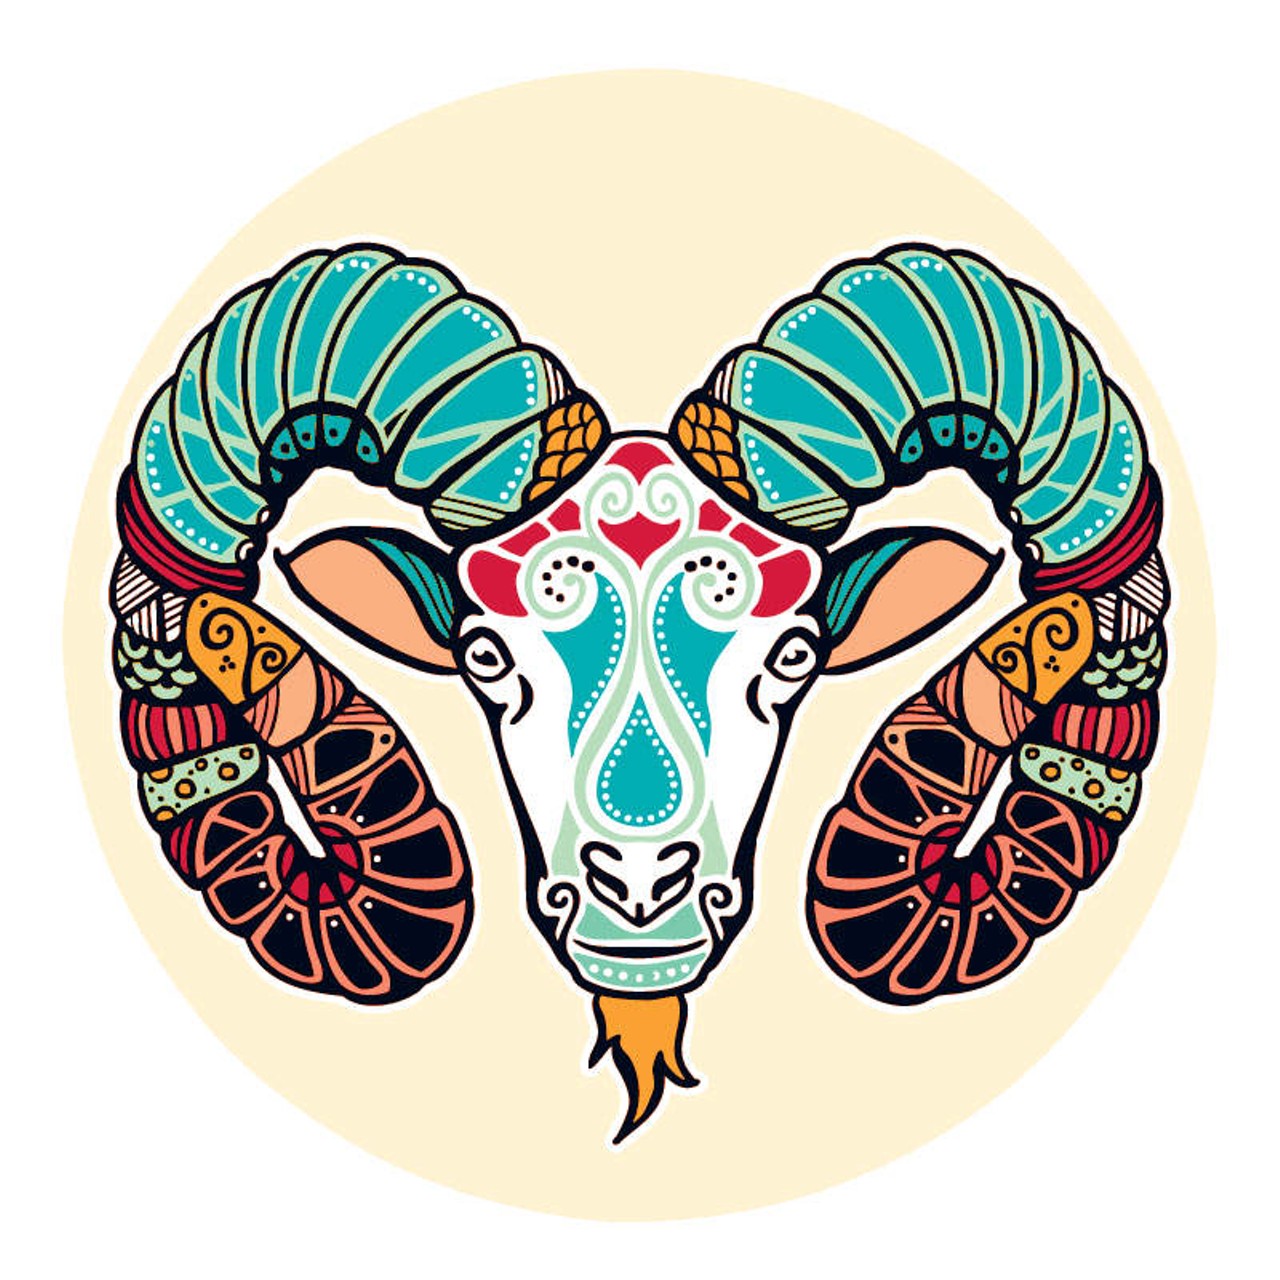 ARIES: March 21 &#150; April 20
If it all seems like you'd do better to cut your losses and move on, the fact that you are terminally impatient needs to be kept in mind. Hey, it could very well be time to let go of things that seemed like pie-in-the-sky, but you aren't there yet. Any forces that are currently working against you are there to test your integrity. They are also there to test your ability to see through veils of deceit and falsehood that seem to crop up whenever push comes to shove. You're known for your truthful and fearless qualities. Turn them on and use them to keep the flame alive.